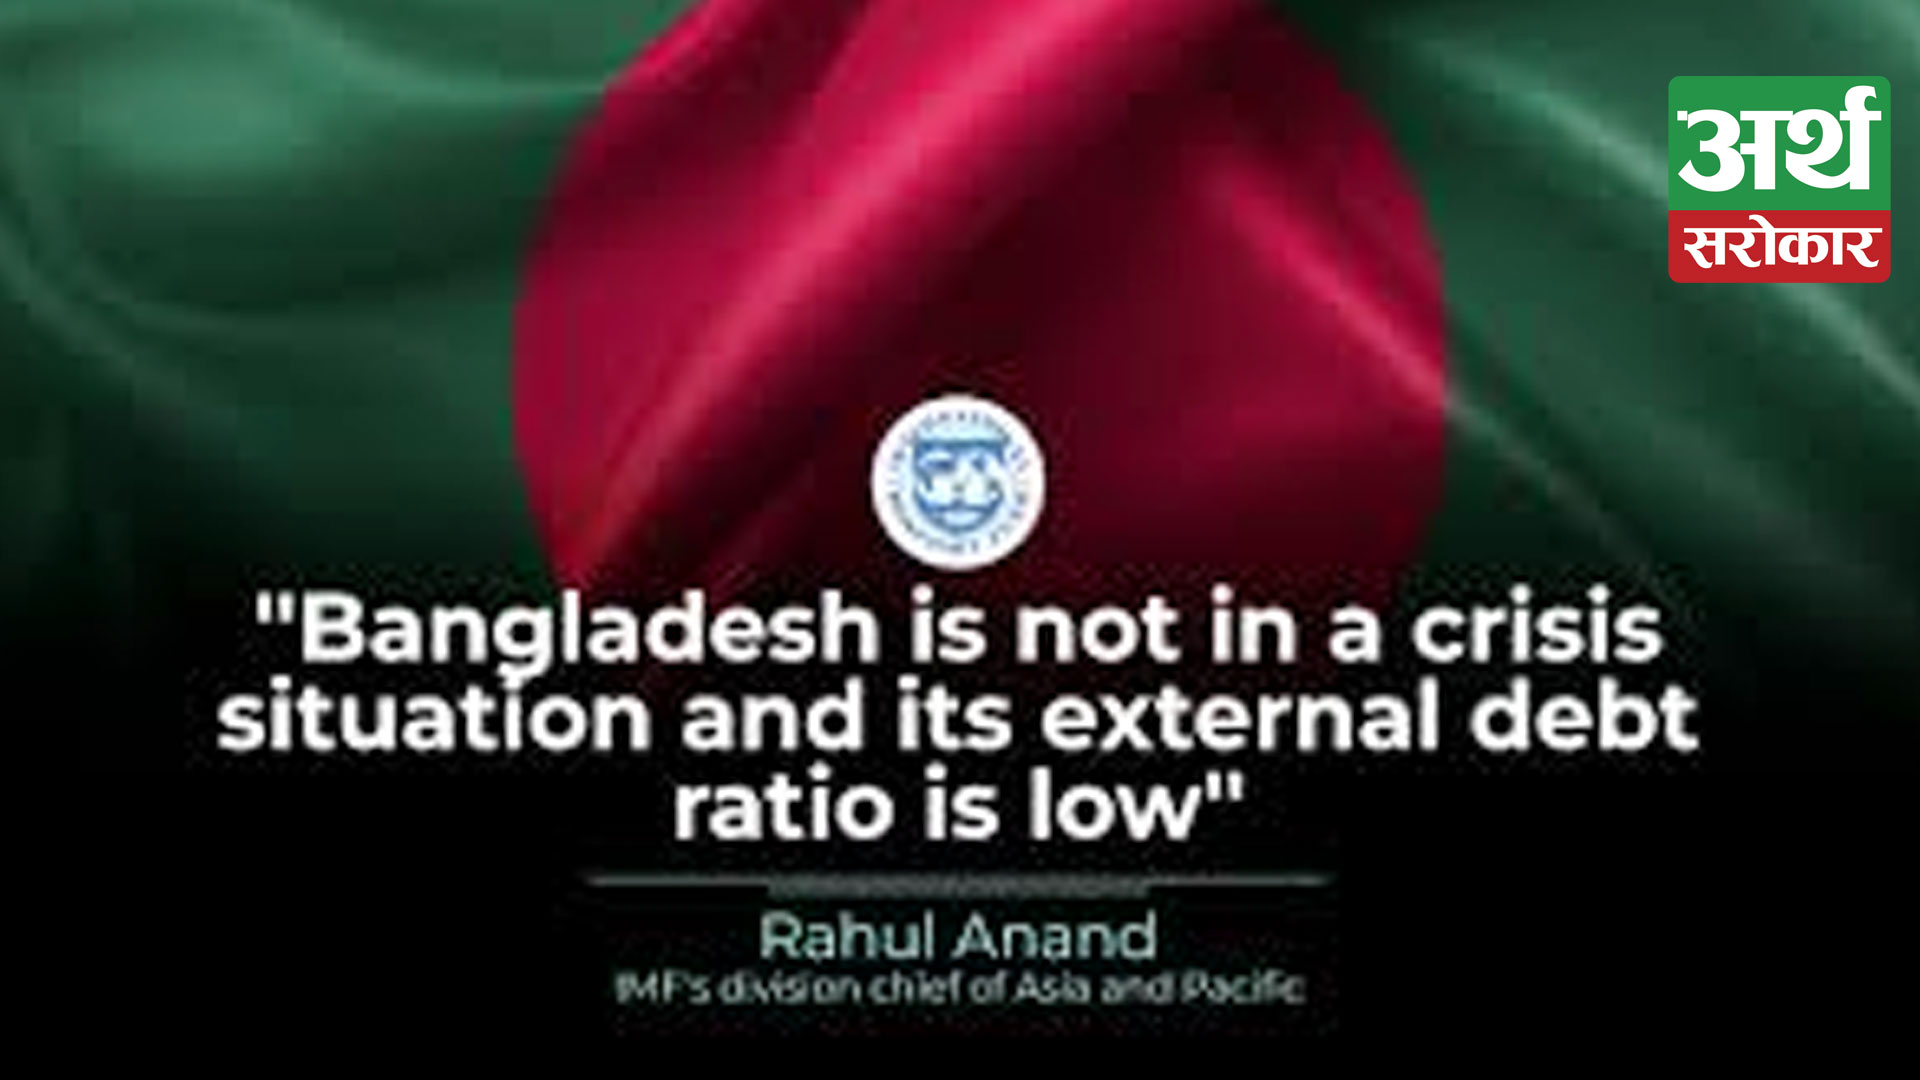 IMF and WB’s assessment of ‘No crisis situation and major food shortage in Bangladesh’